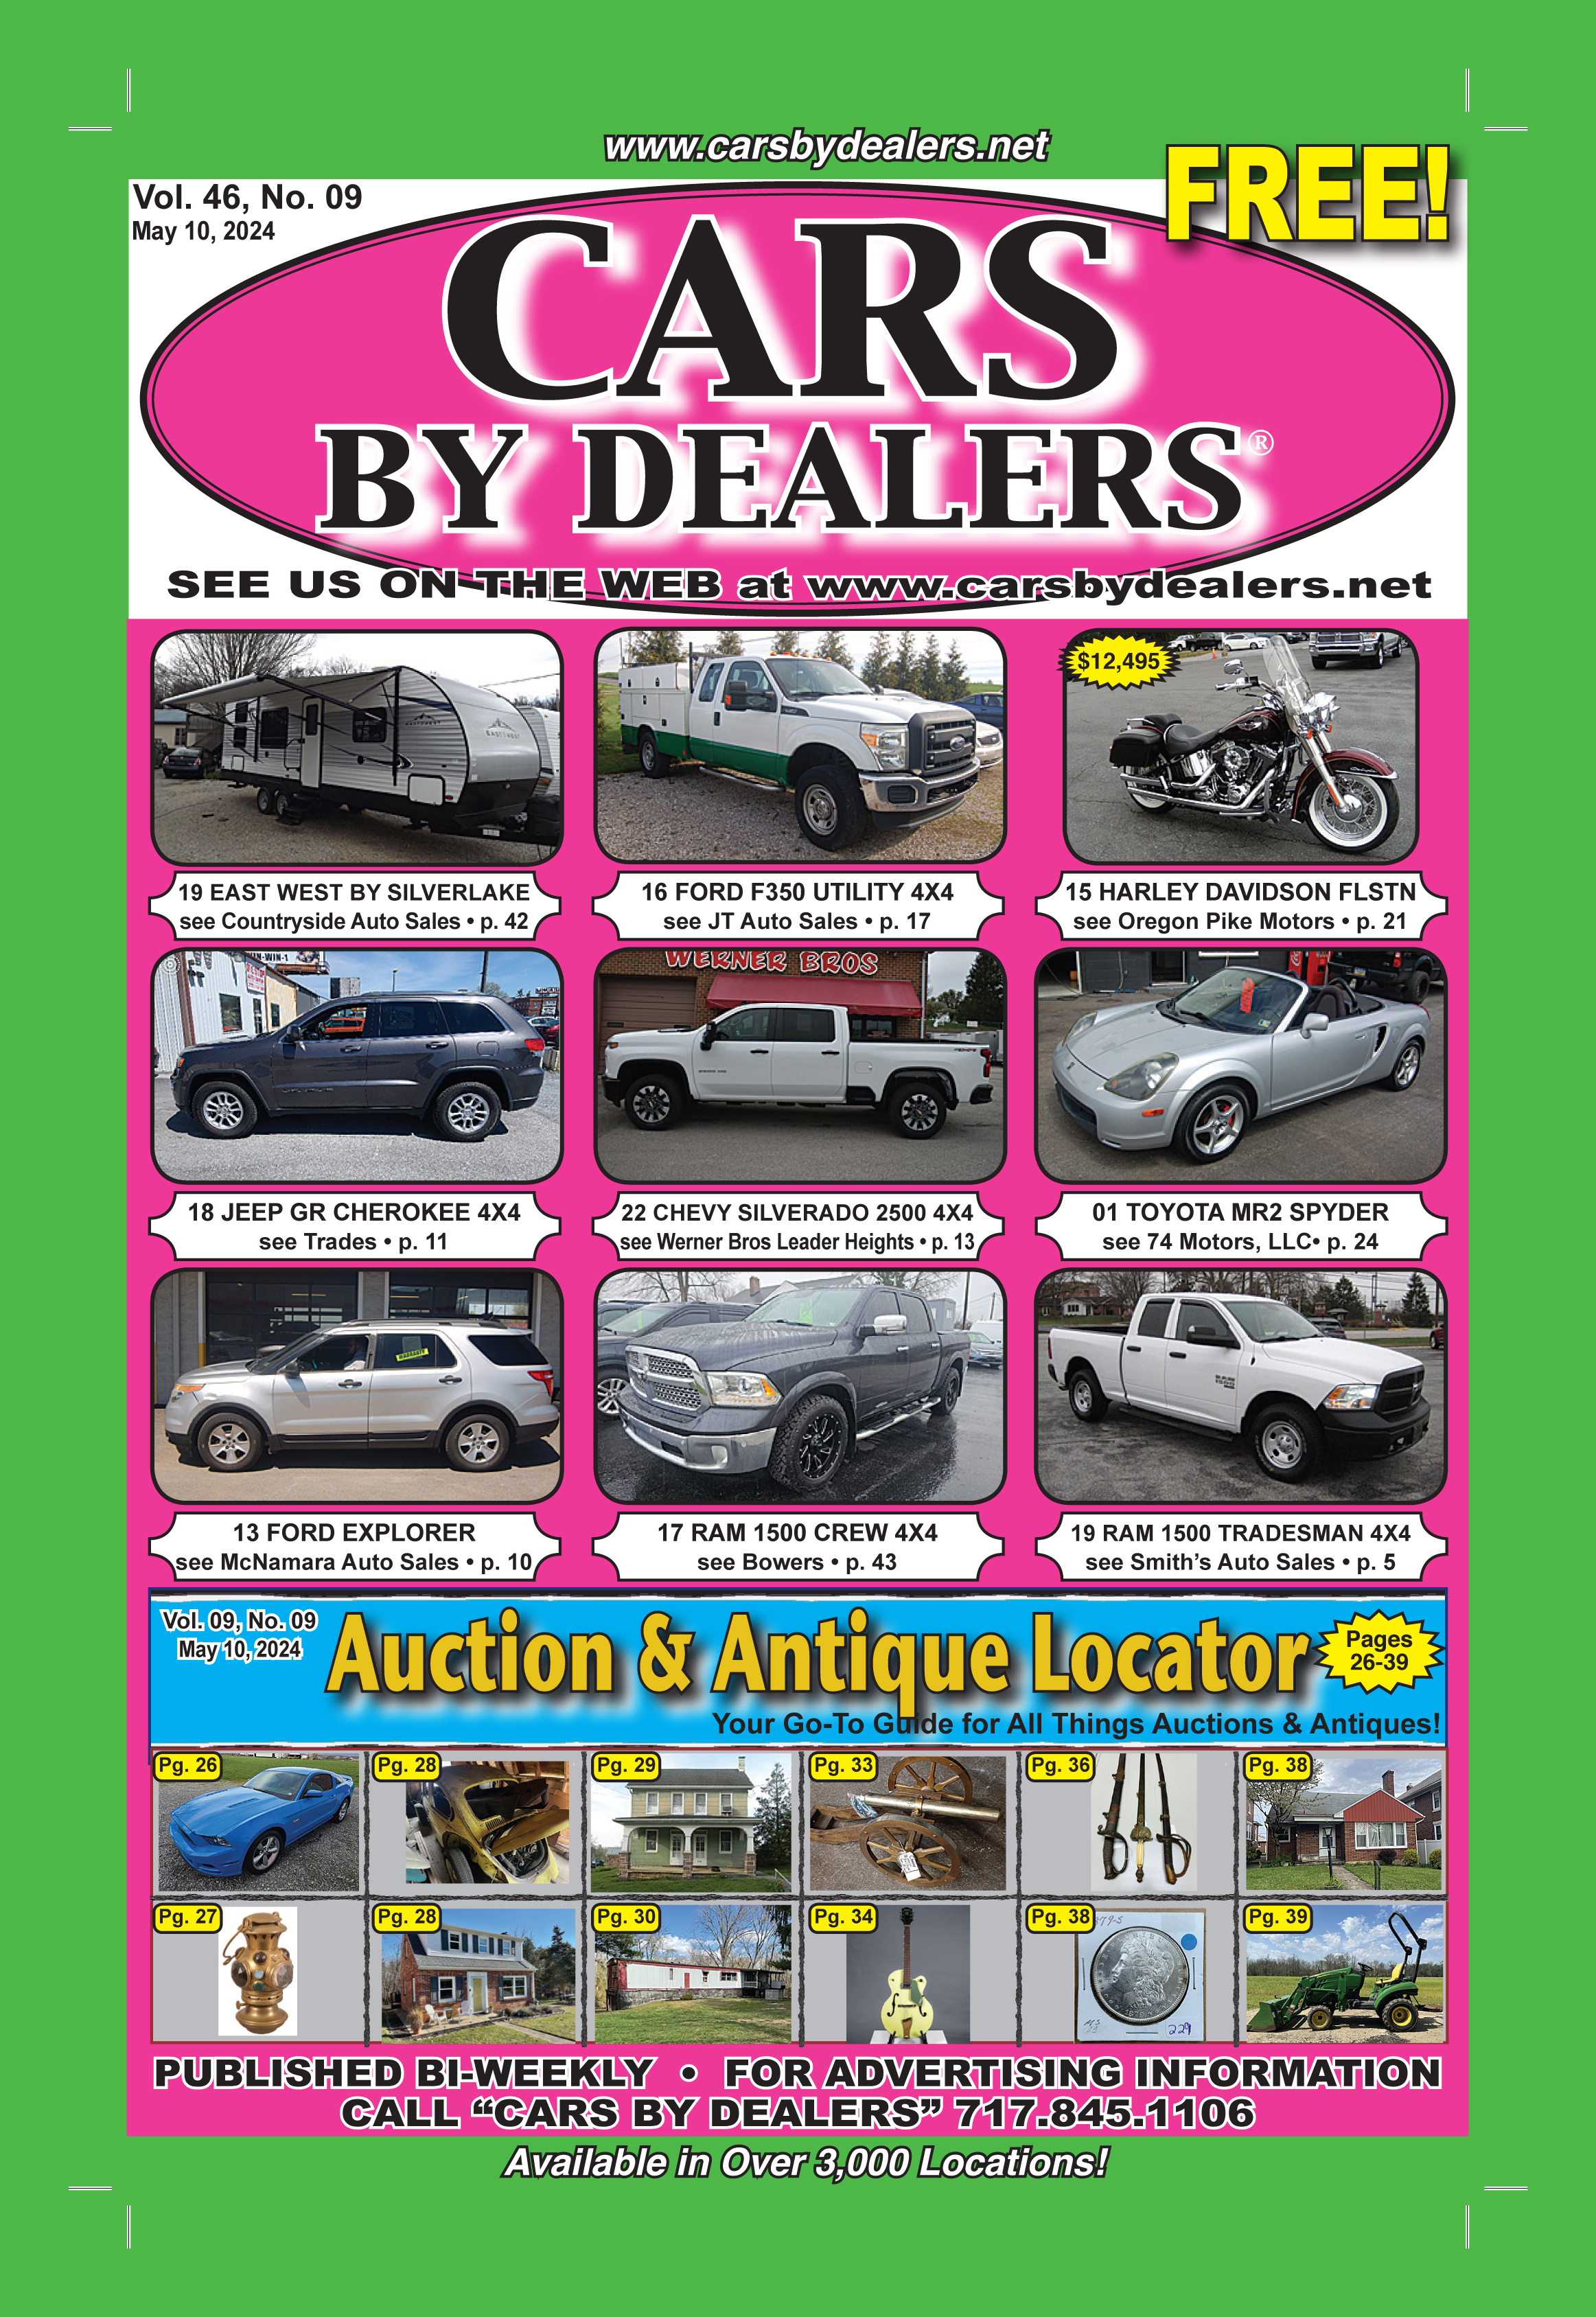 PDF of Cars By Dealers